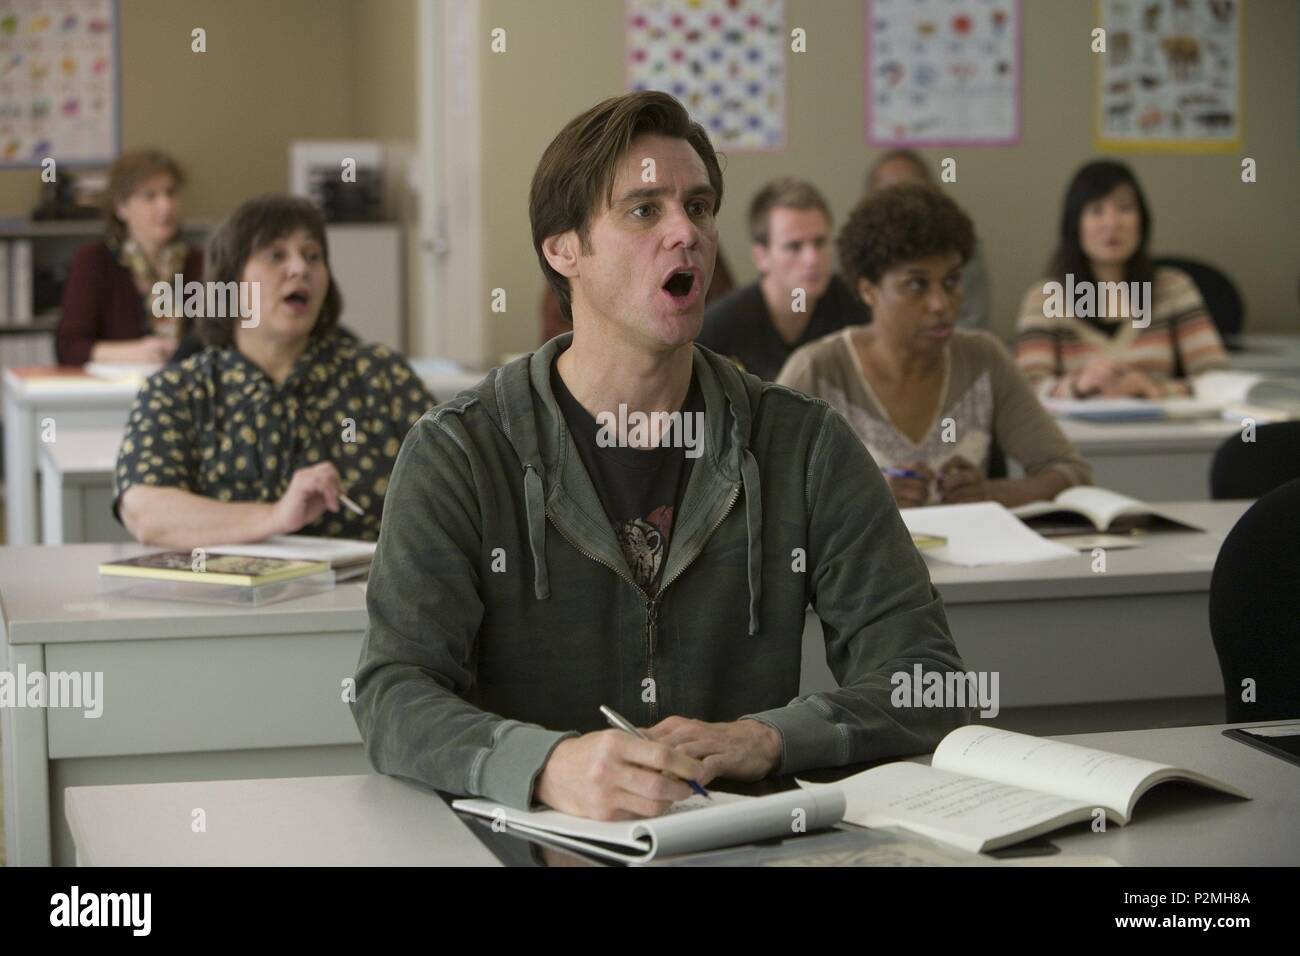 Original Film Title: YES MAN.  English Title: YES MAN.  Film Director: PEYTON REED.  Year: 2008.  Stars: JIM CARREY. Credit: HEYDAY FILMS/VILLAGE ROADSHOW PICTURES/WARNER BROS. PICTURES / MOSELEY, MELISSA / Album Stock Photo